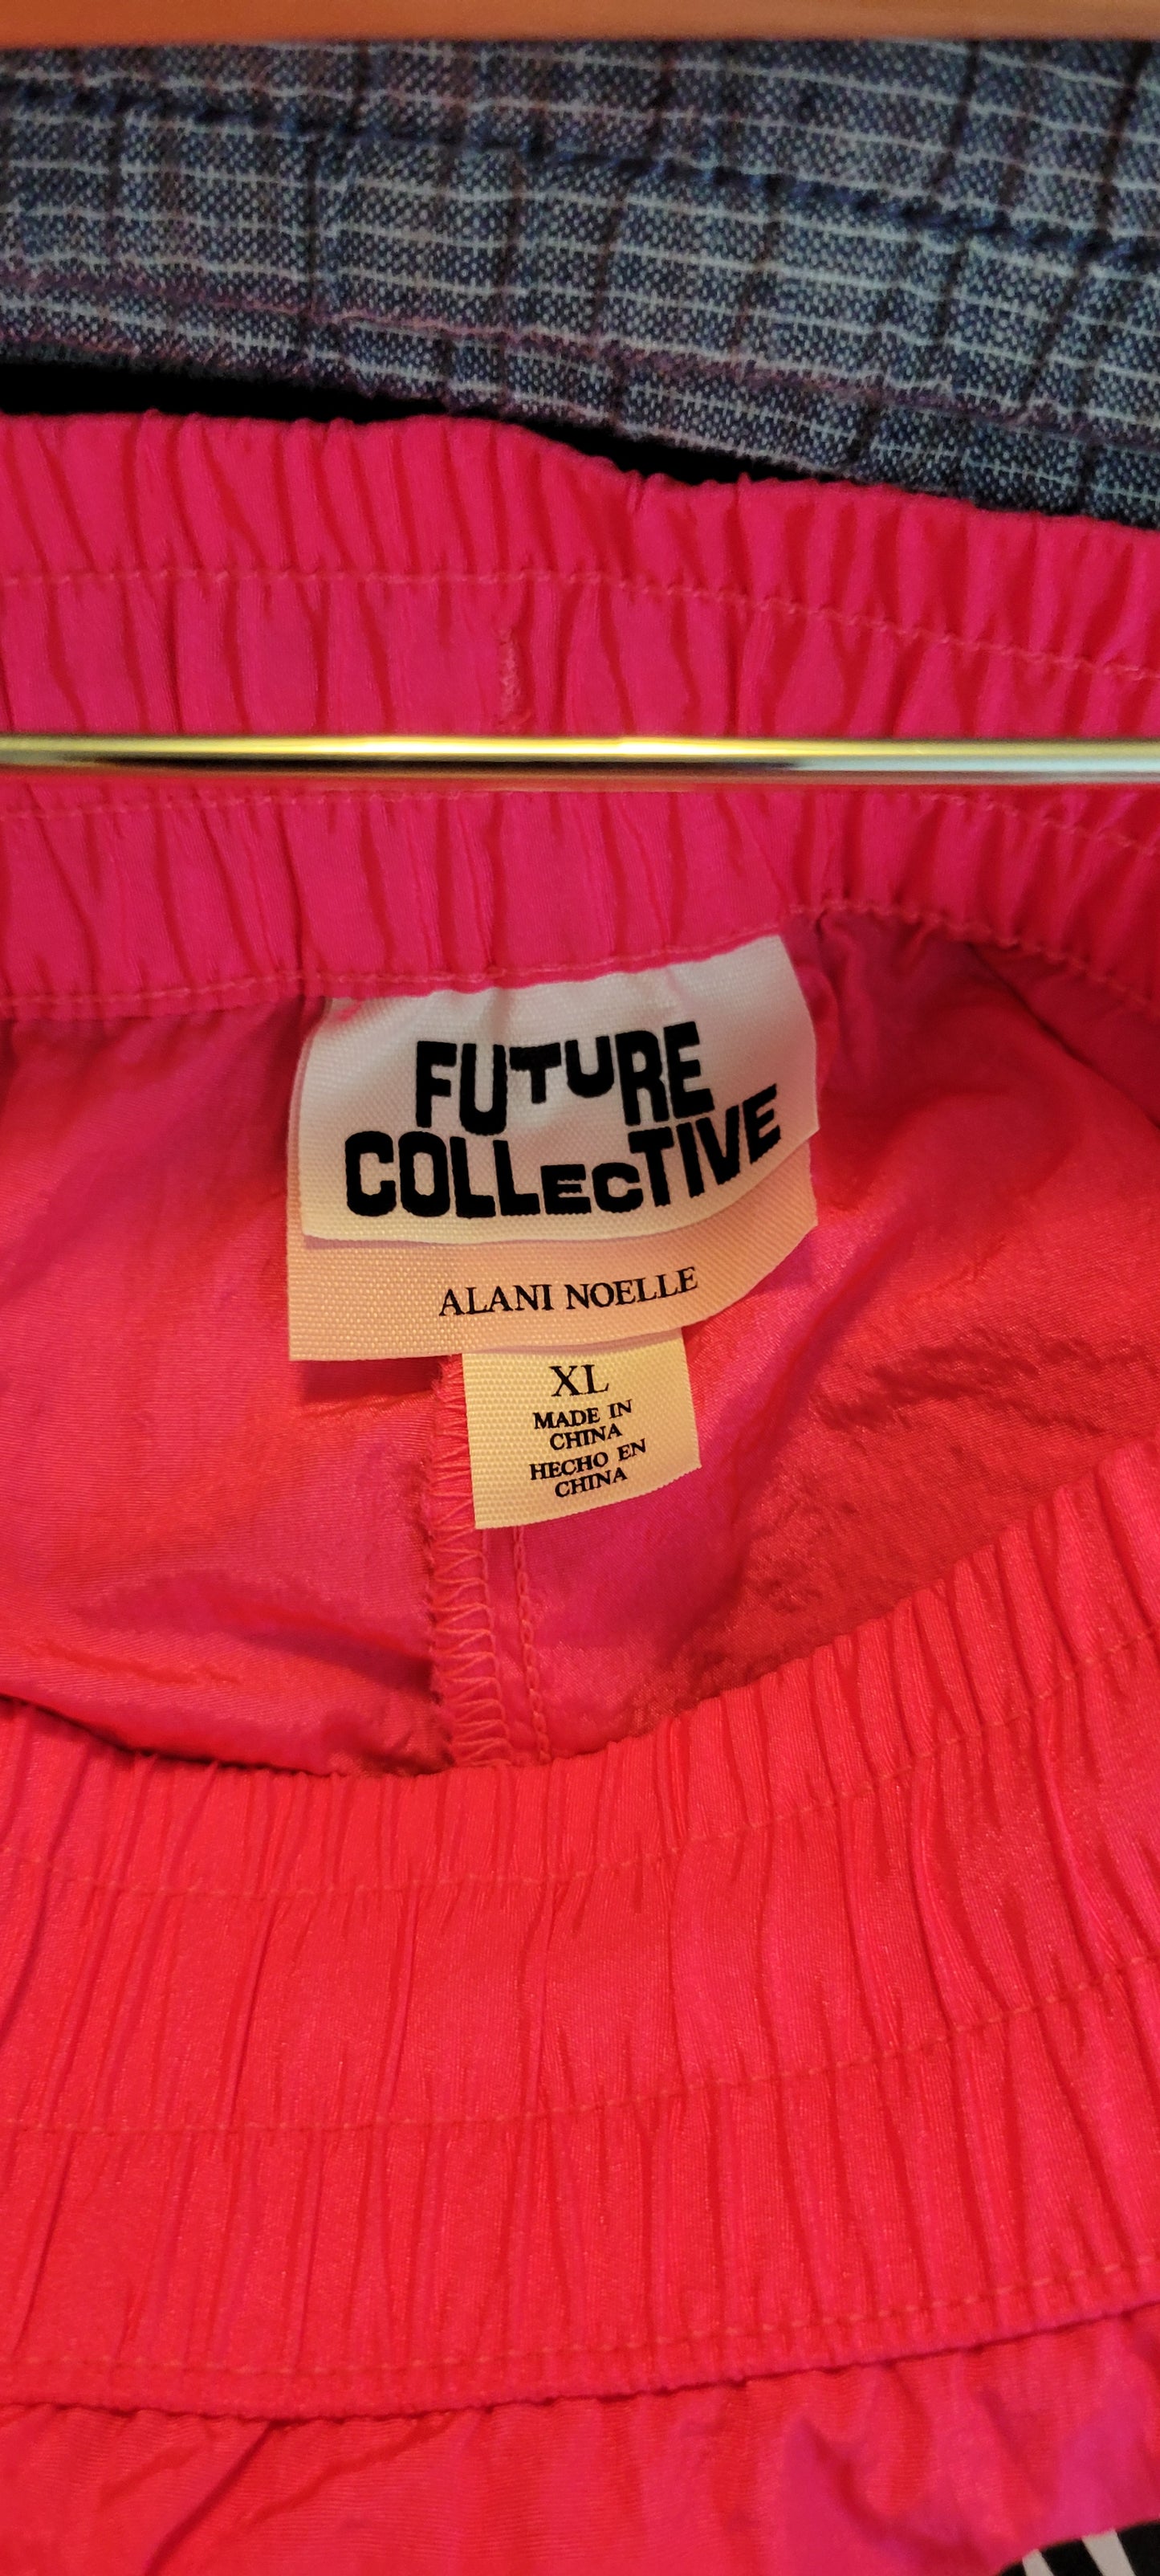 Future Collective (Target) Hot Pink 90s Style Shorts, Women's Size XL NEW WITH TAGS